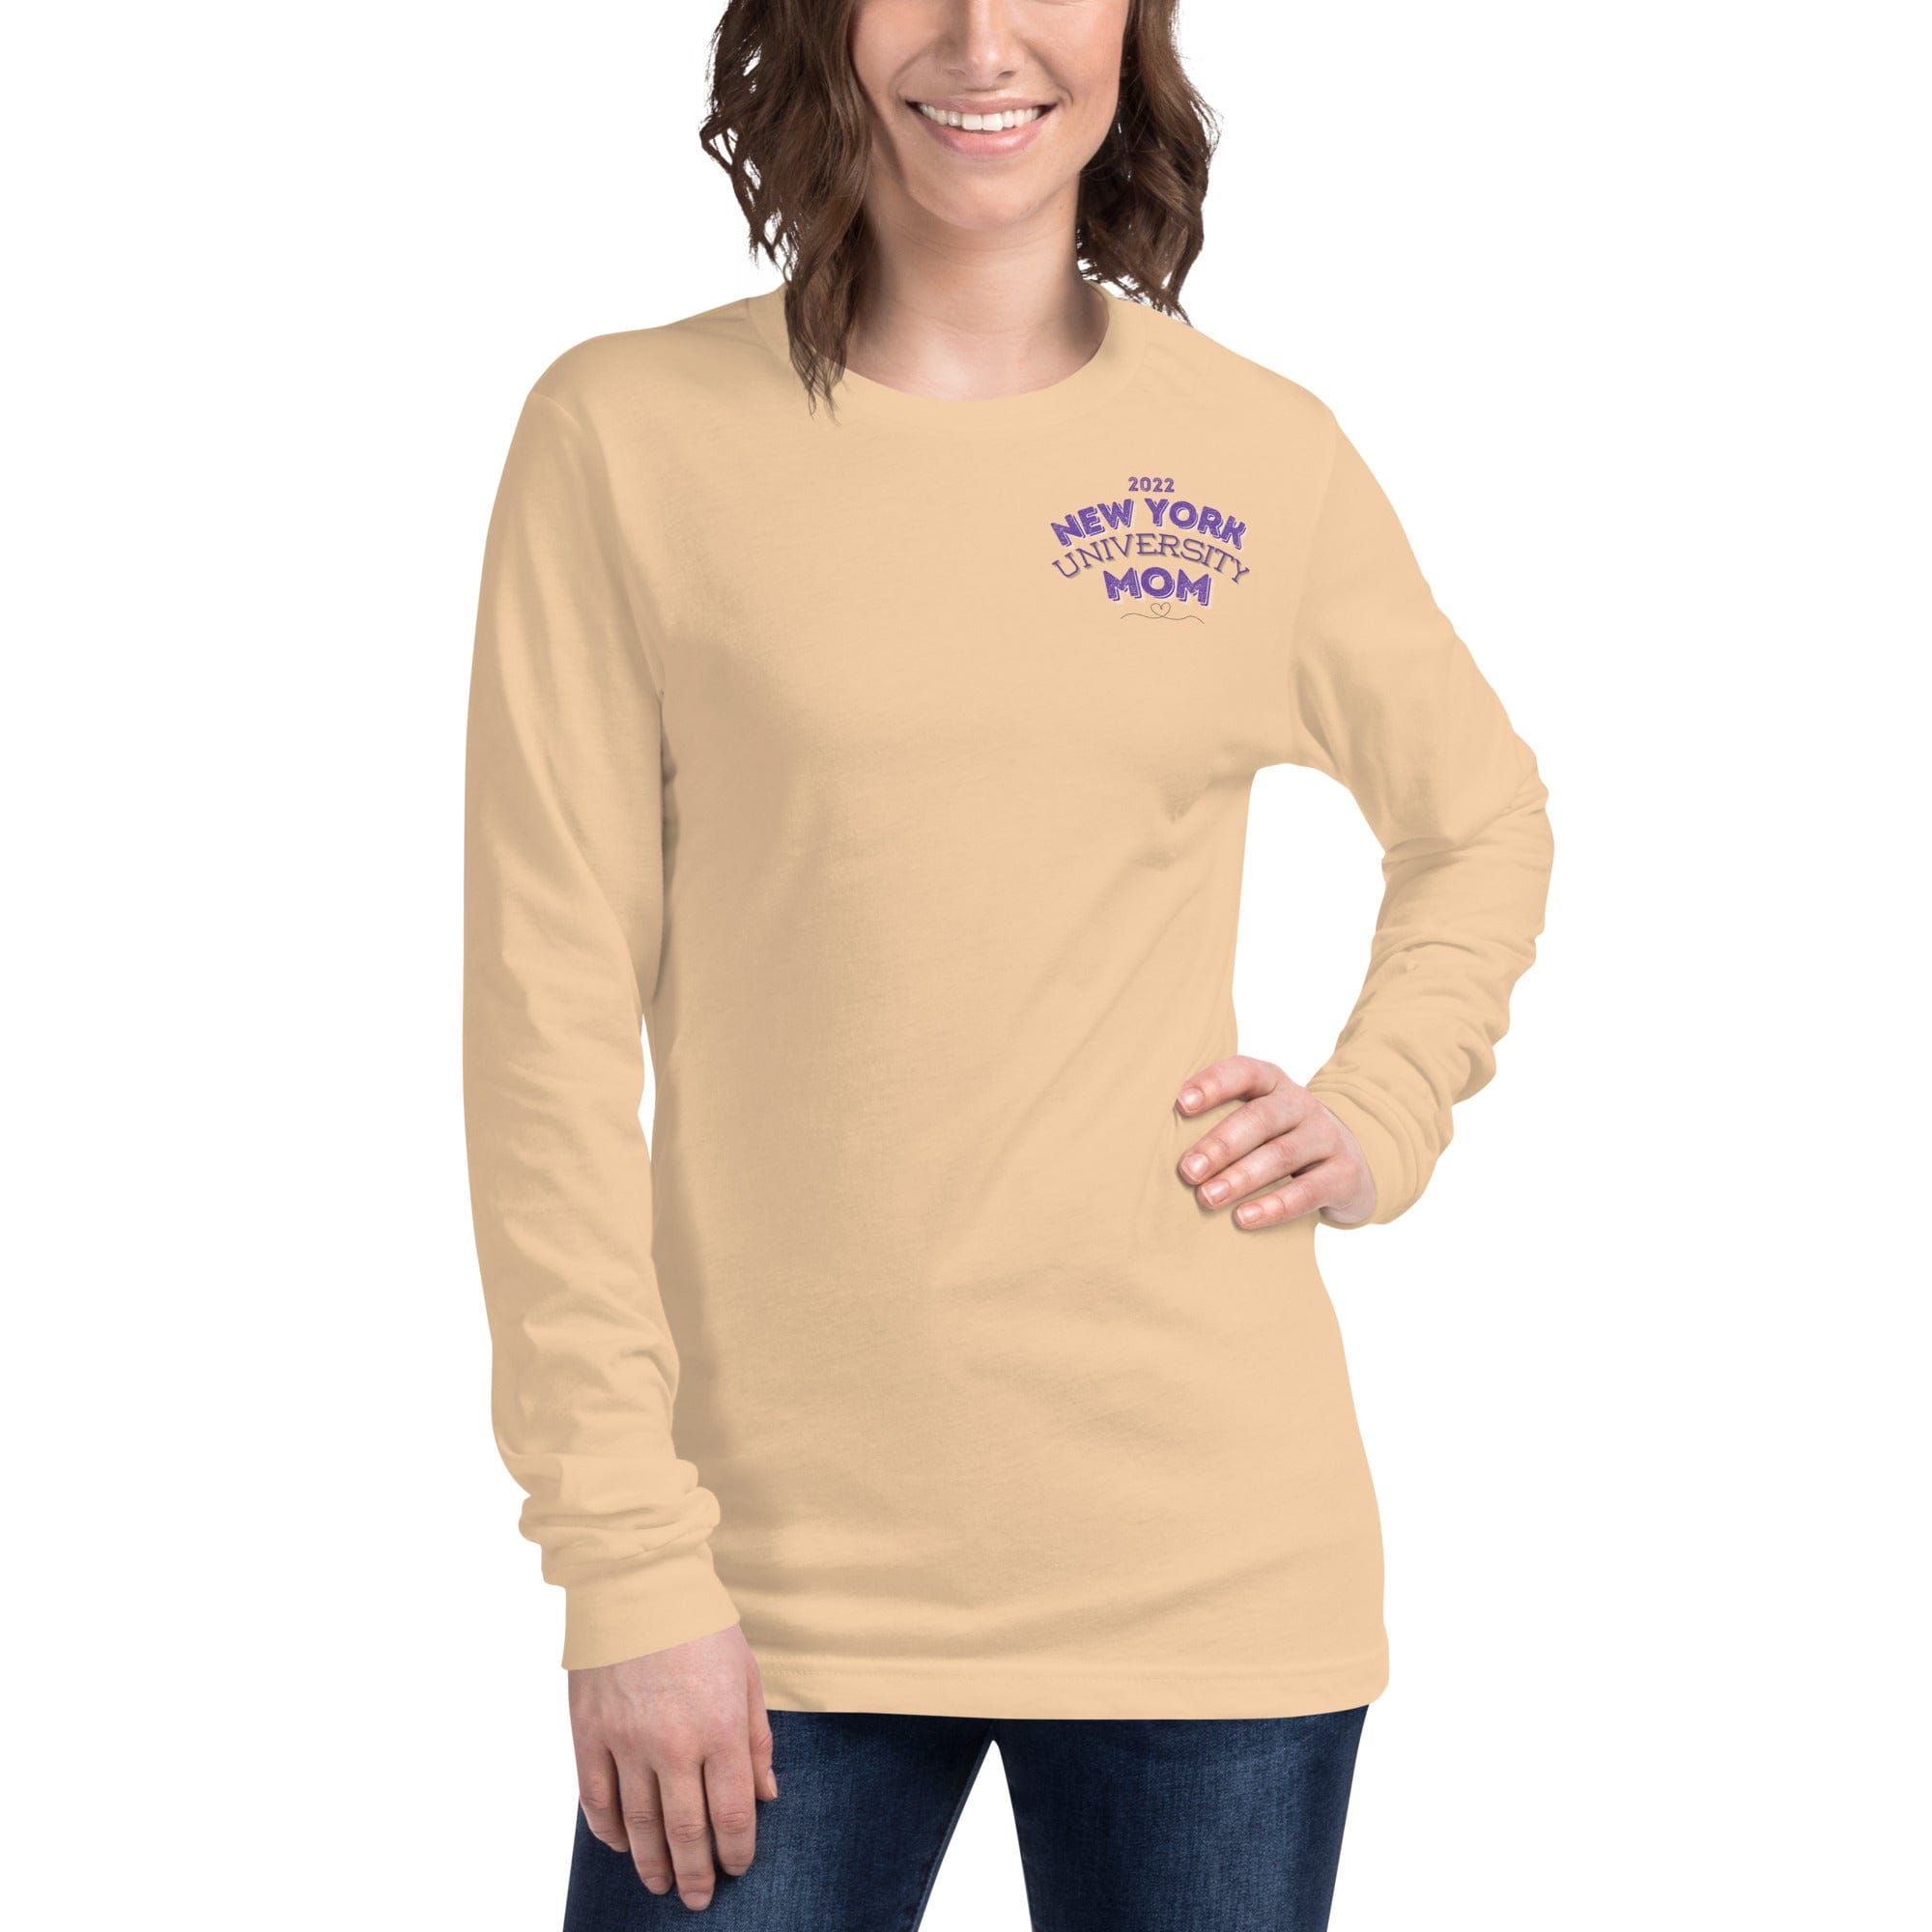 Spruced Roost Sand Dune / XS New York University Mom Long Sleeve Tee